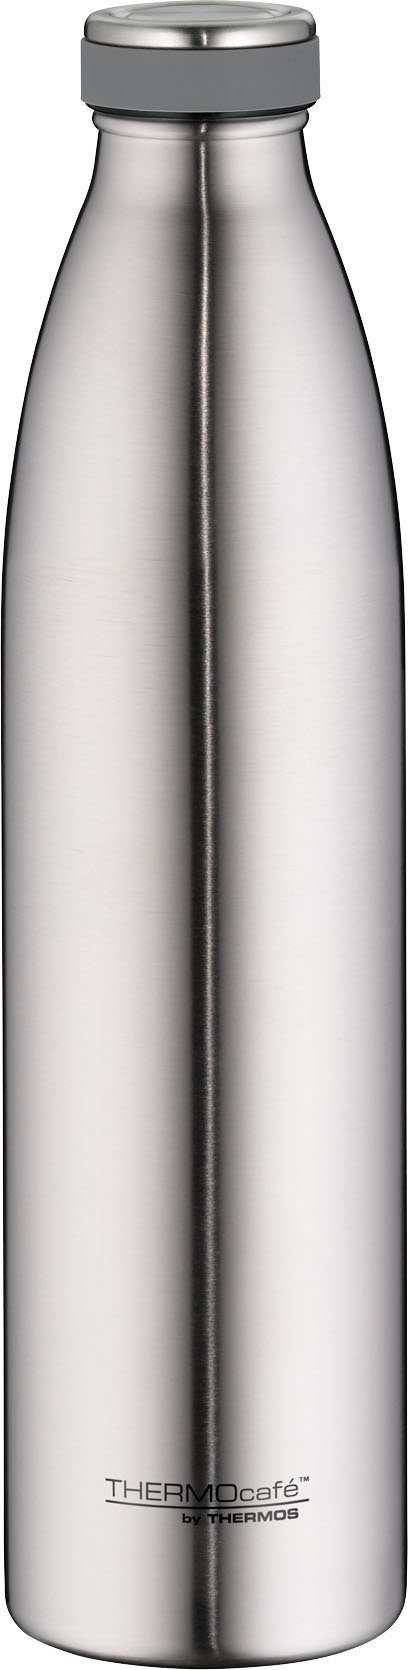 THERMOS Thermoflasche Thermo Cafe silberfarben | 